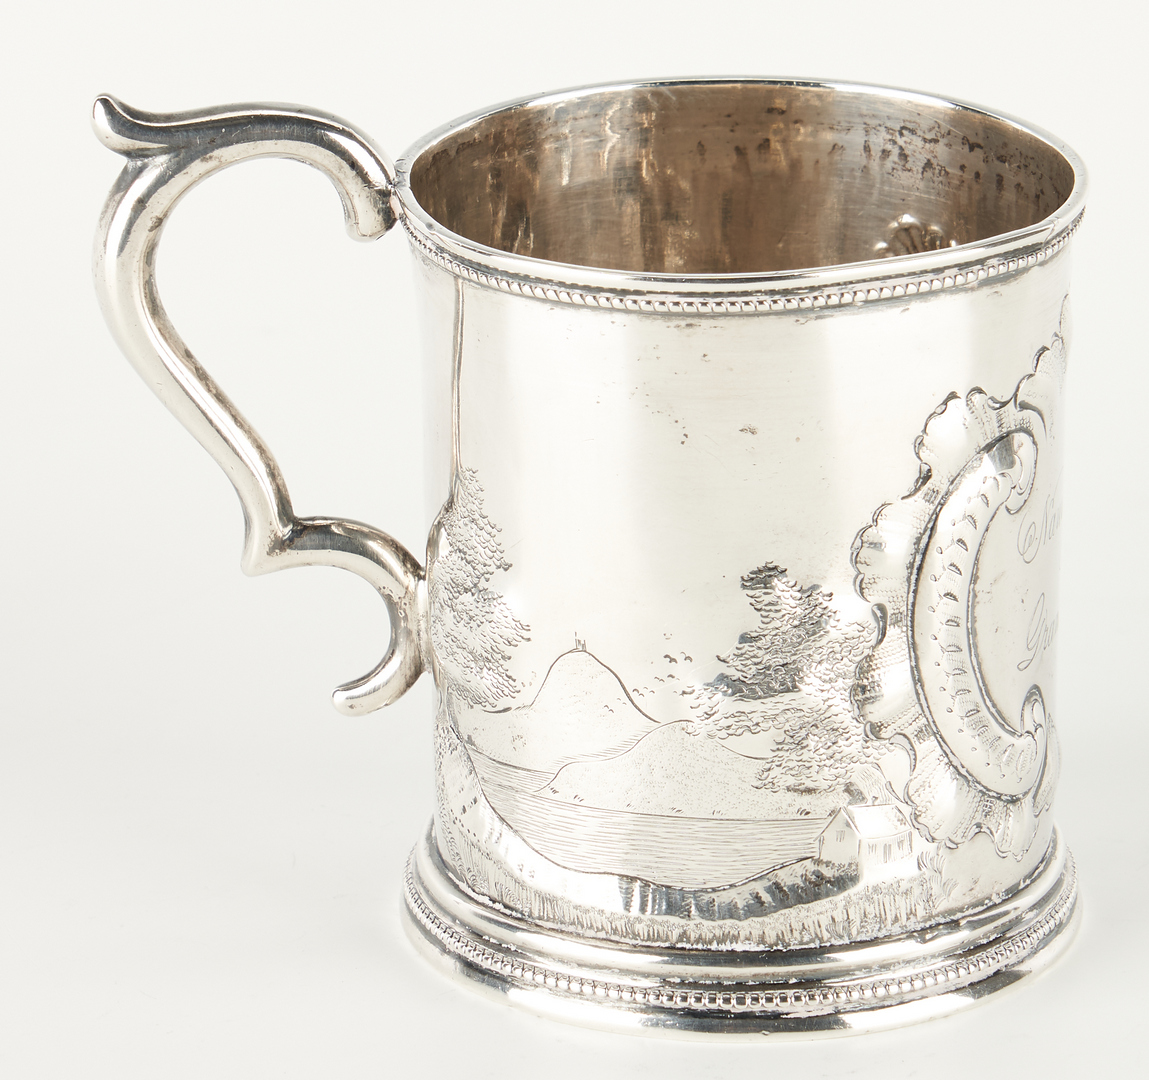 Lot 293: 19th C. Sterling Silver Scenic Mug & Fluted Silver Dish, 2 items